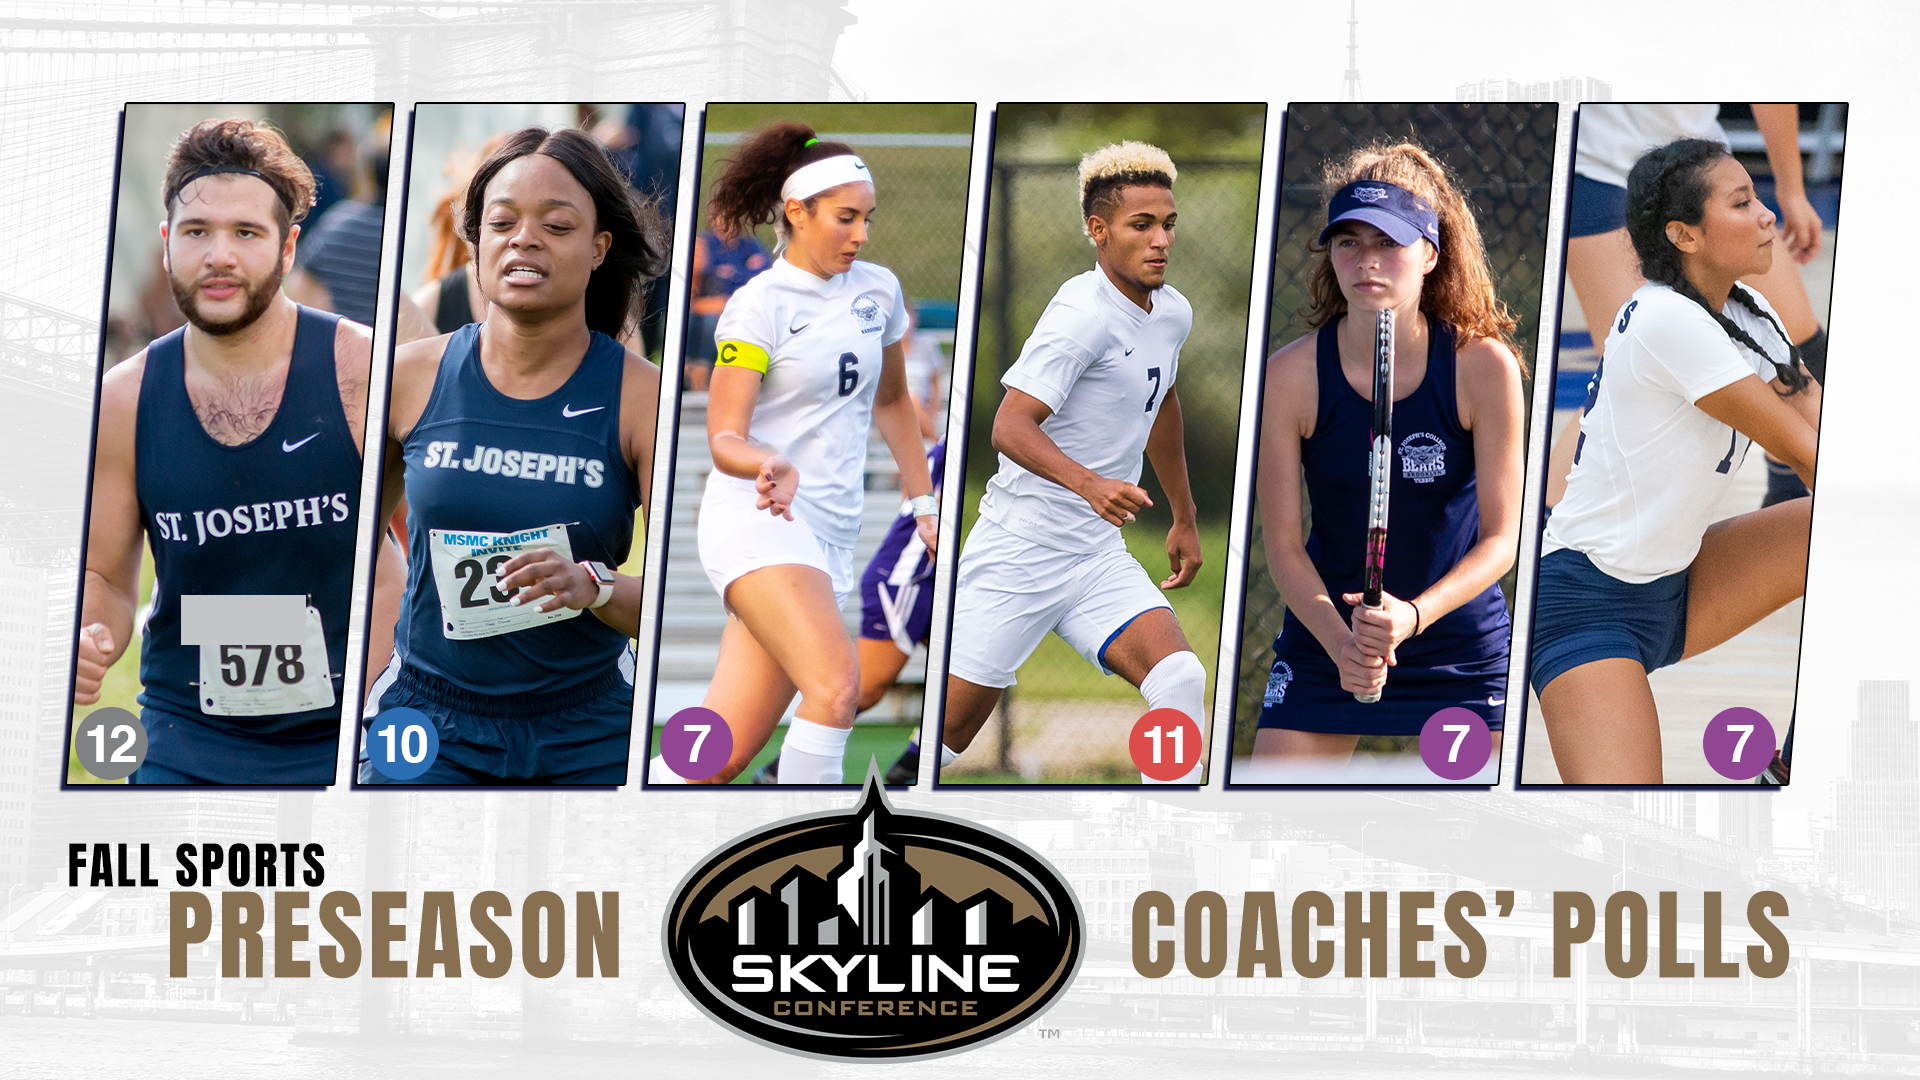 Skyline Conference Fall Sport Preseason Coaches Polls Released